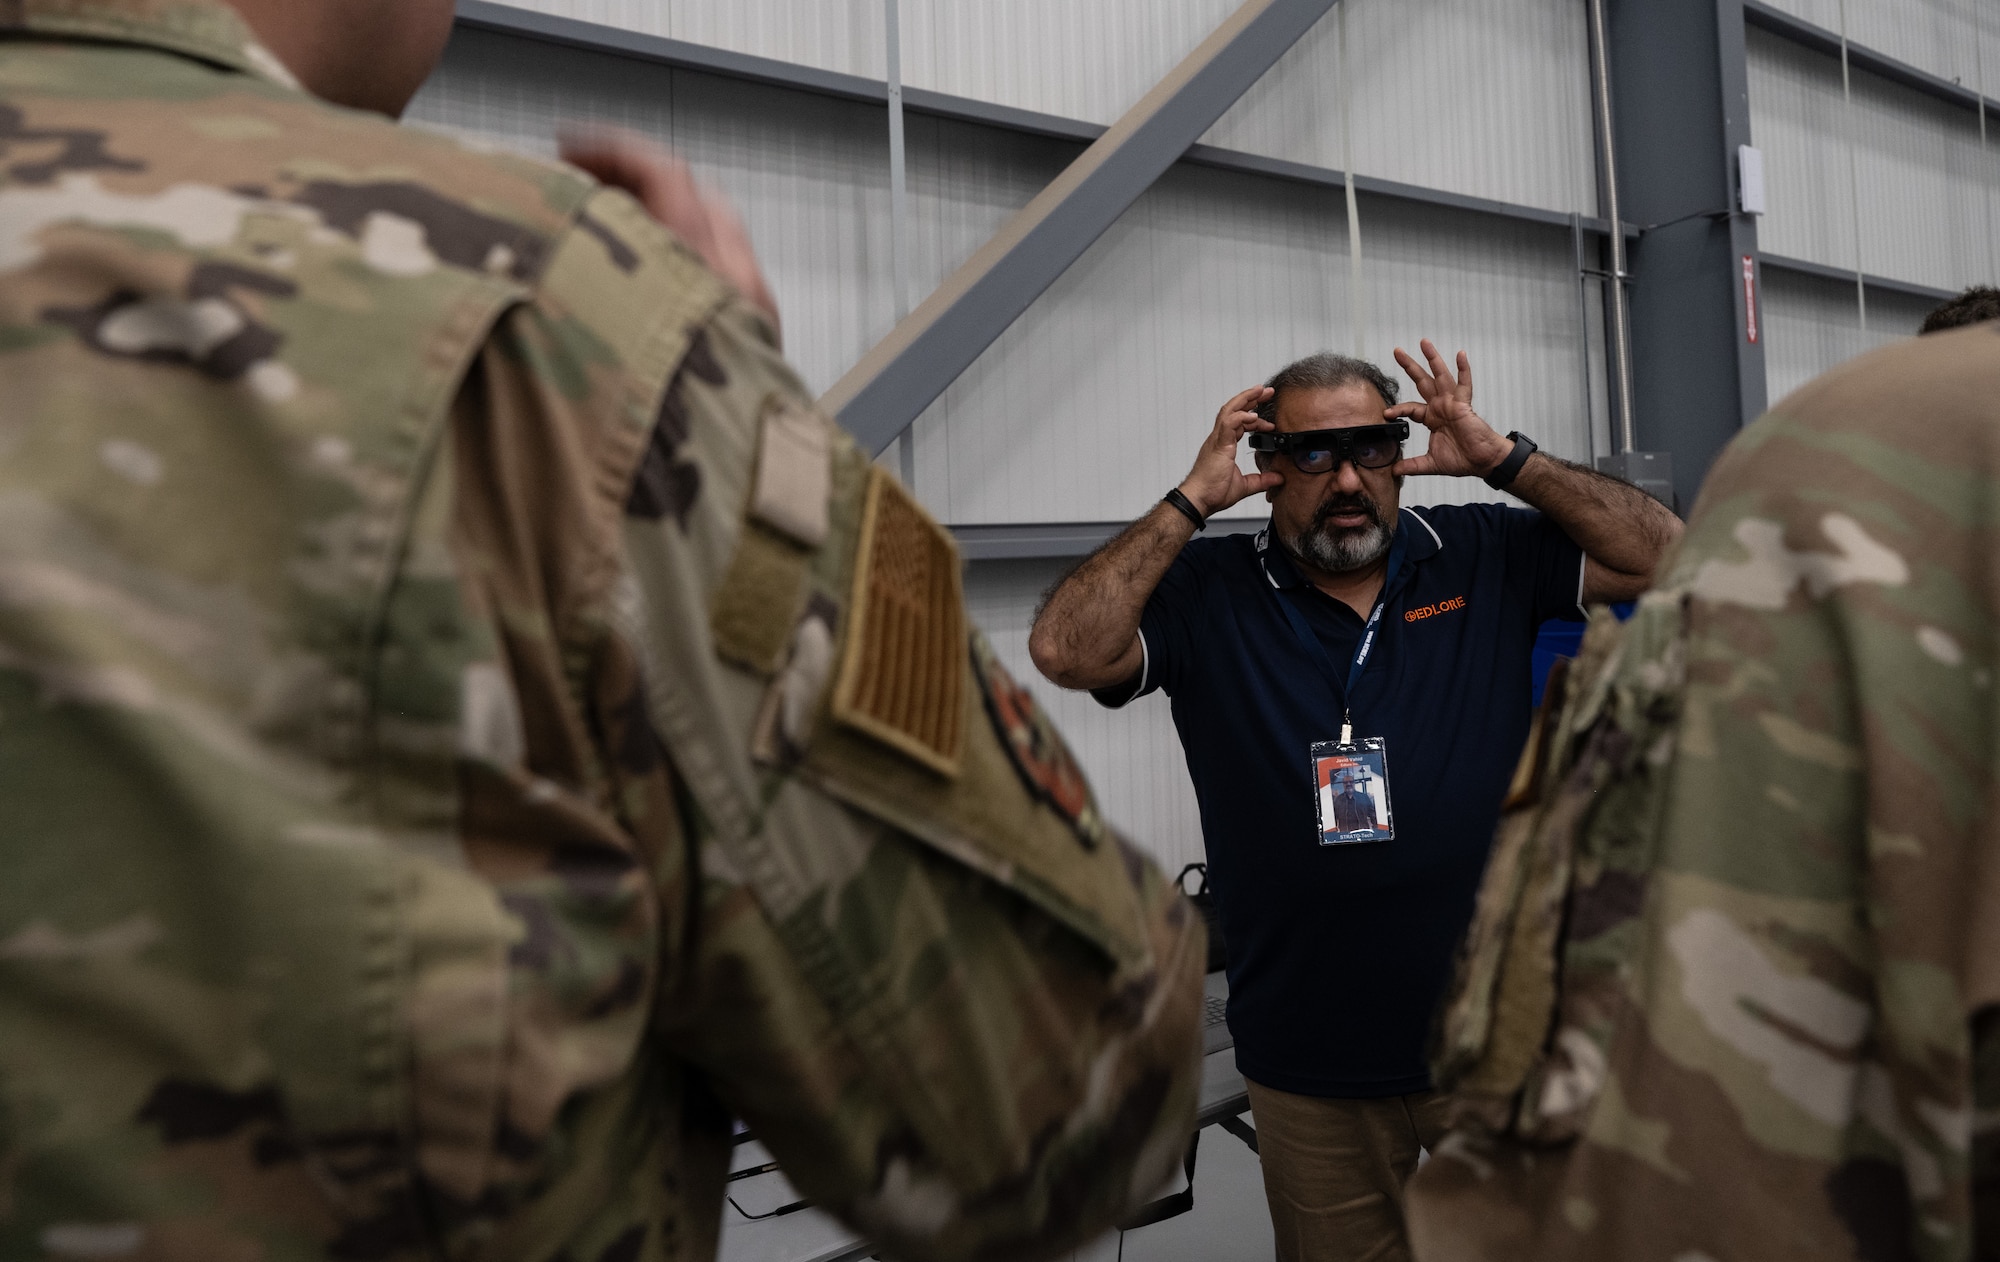 Javid Vahid, Edlore president, demonstrates how to use his company’s voice-activated glasses during STRATO-Tech, a convention for the sustainment of the KC-135 Stratotanker, April 22, 2024, in Wichita, Kansas. Air Mobility Command, the National Center for Manufacturing Sciences, Wichita State University’s National Institute for Aviation Research, and U.S. Transportation Command partnered to create an innovative testbed that keeps the KC-135 relevant and fit to fight. (U.S. Air Force photo by Staff Sgt. Tryphena Mayhugh)